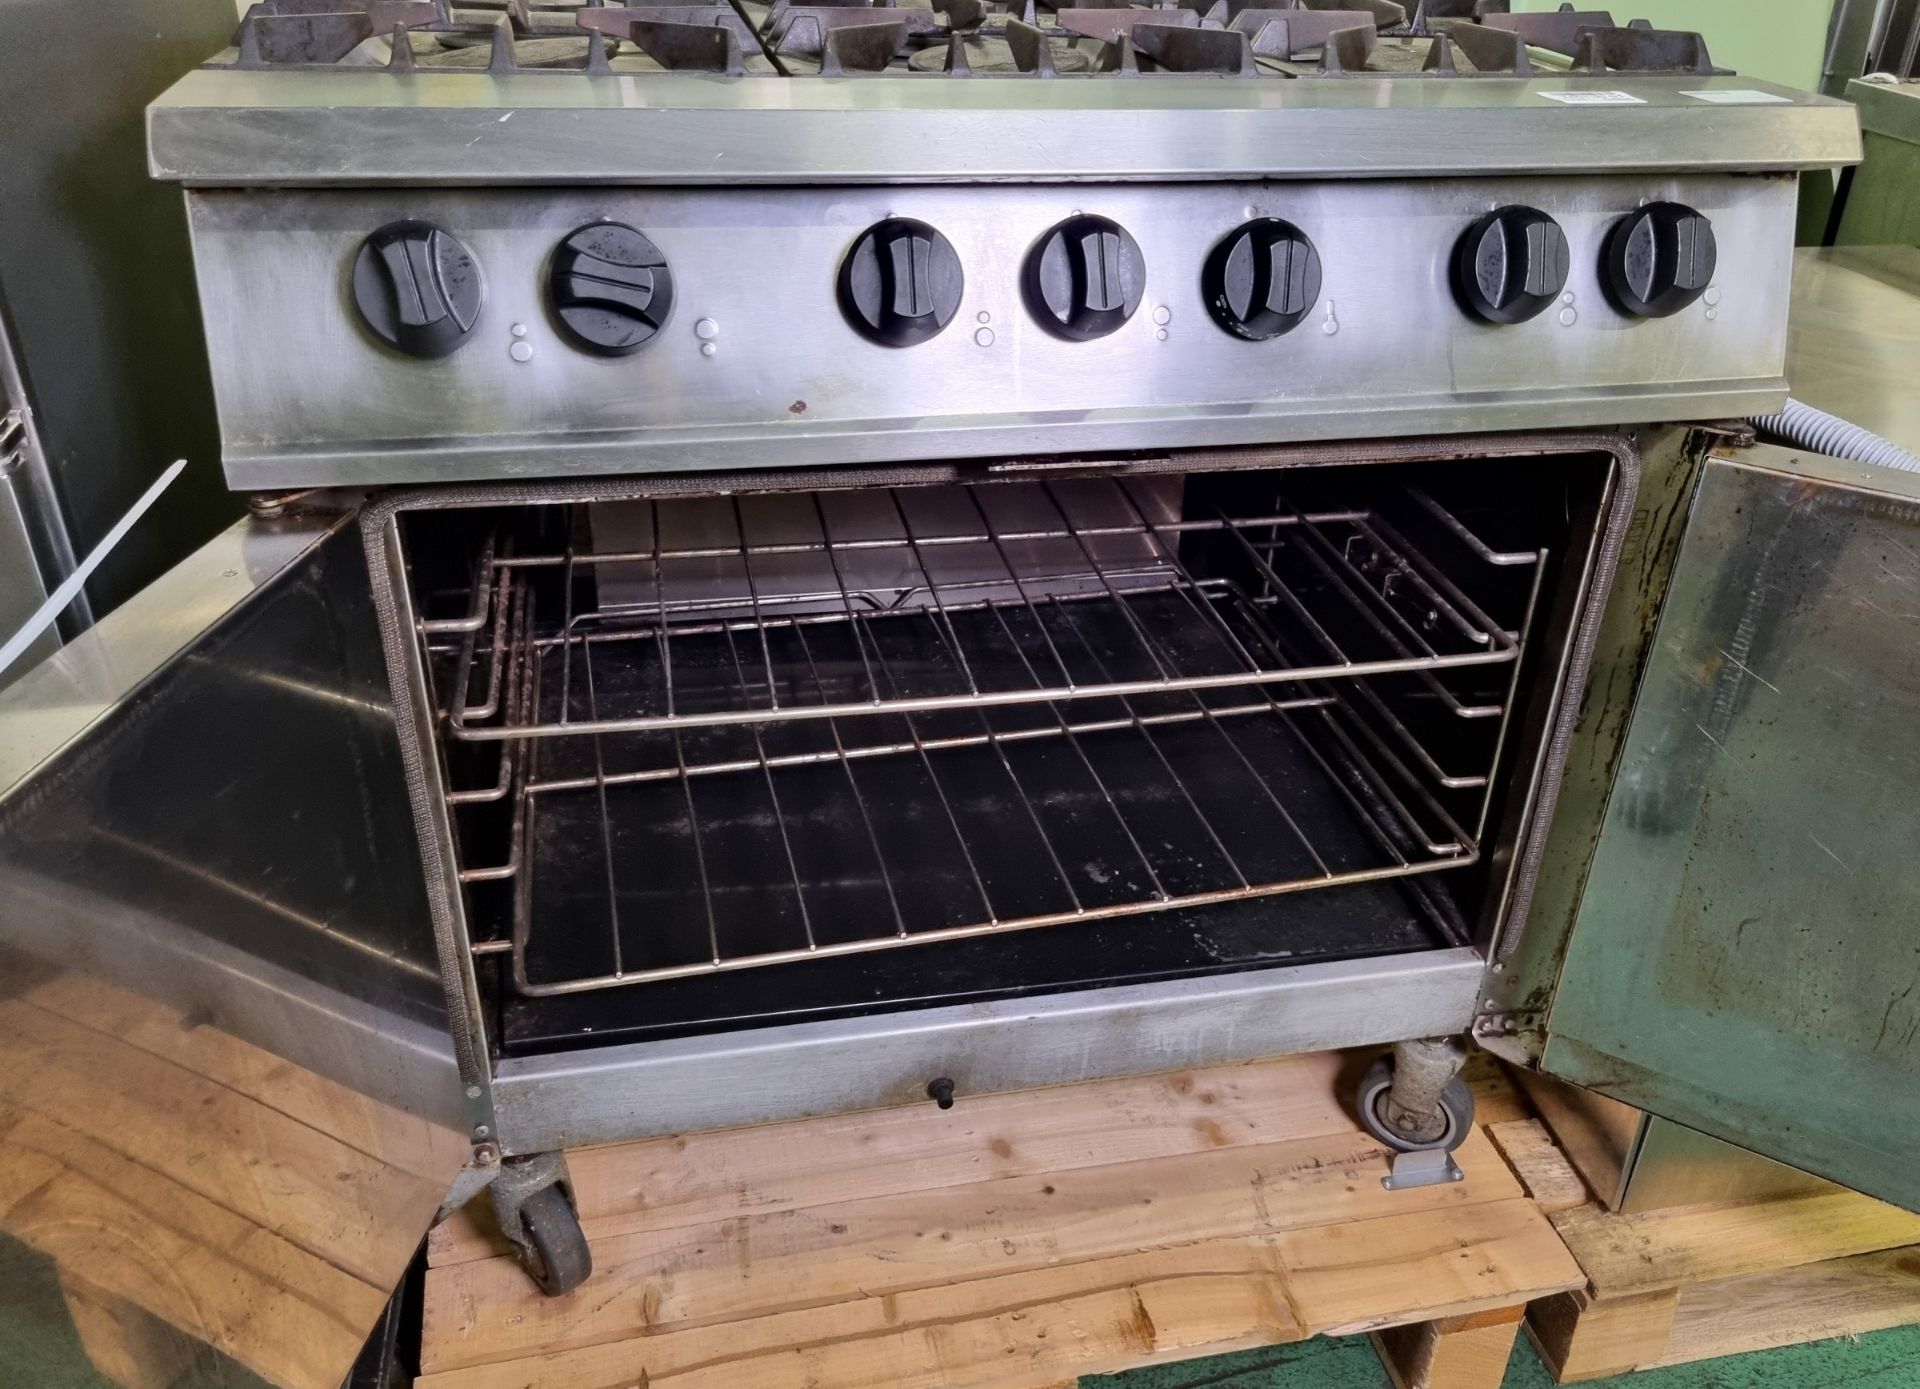 Falcon 6 burner gas oven - W 900 x D 820 x H 940 mm - Image 3 of 4